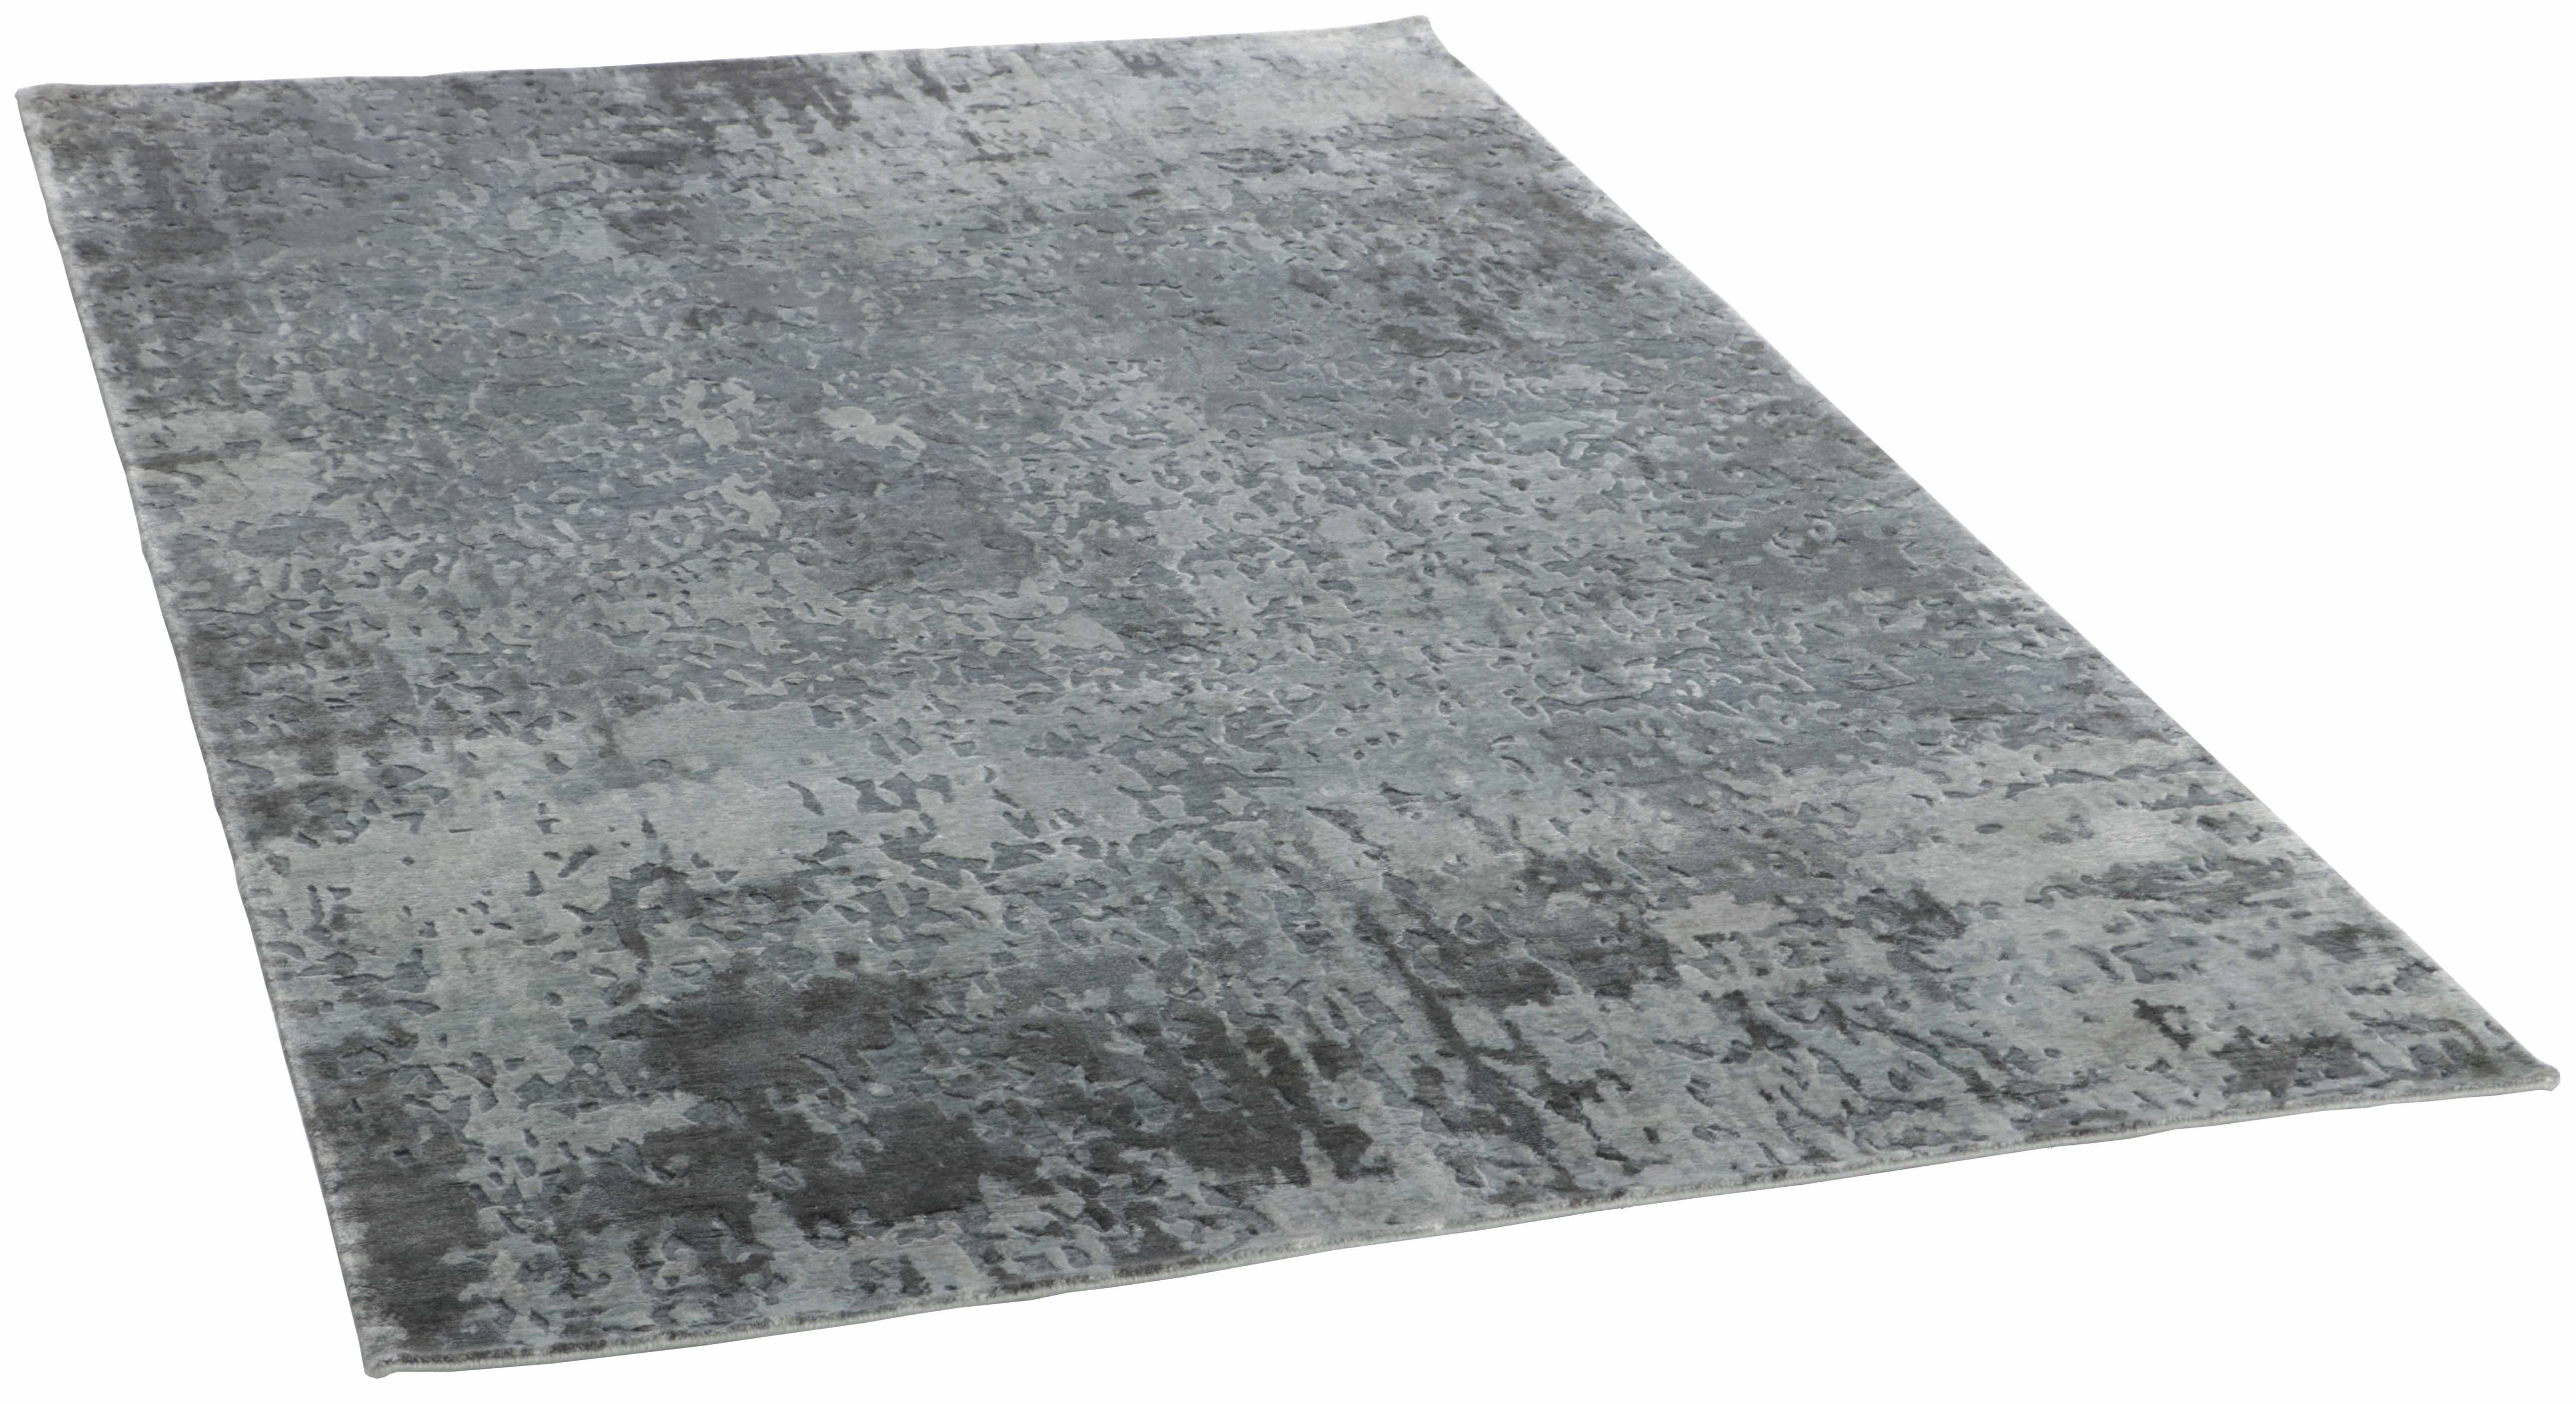 Large area rug with  abstract design in grey and beige